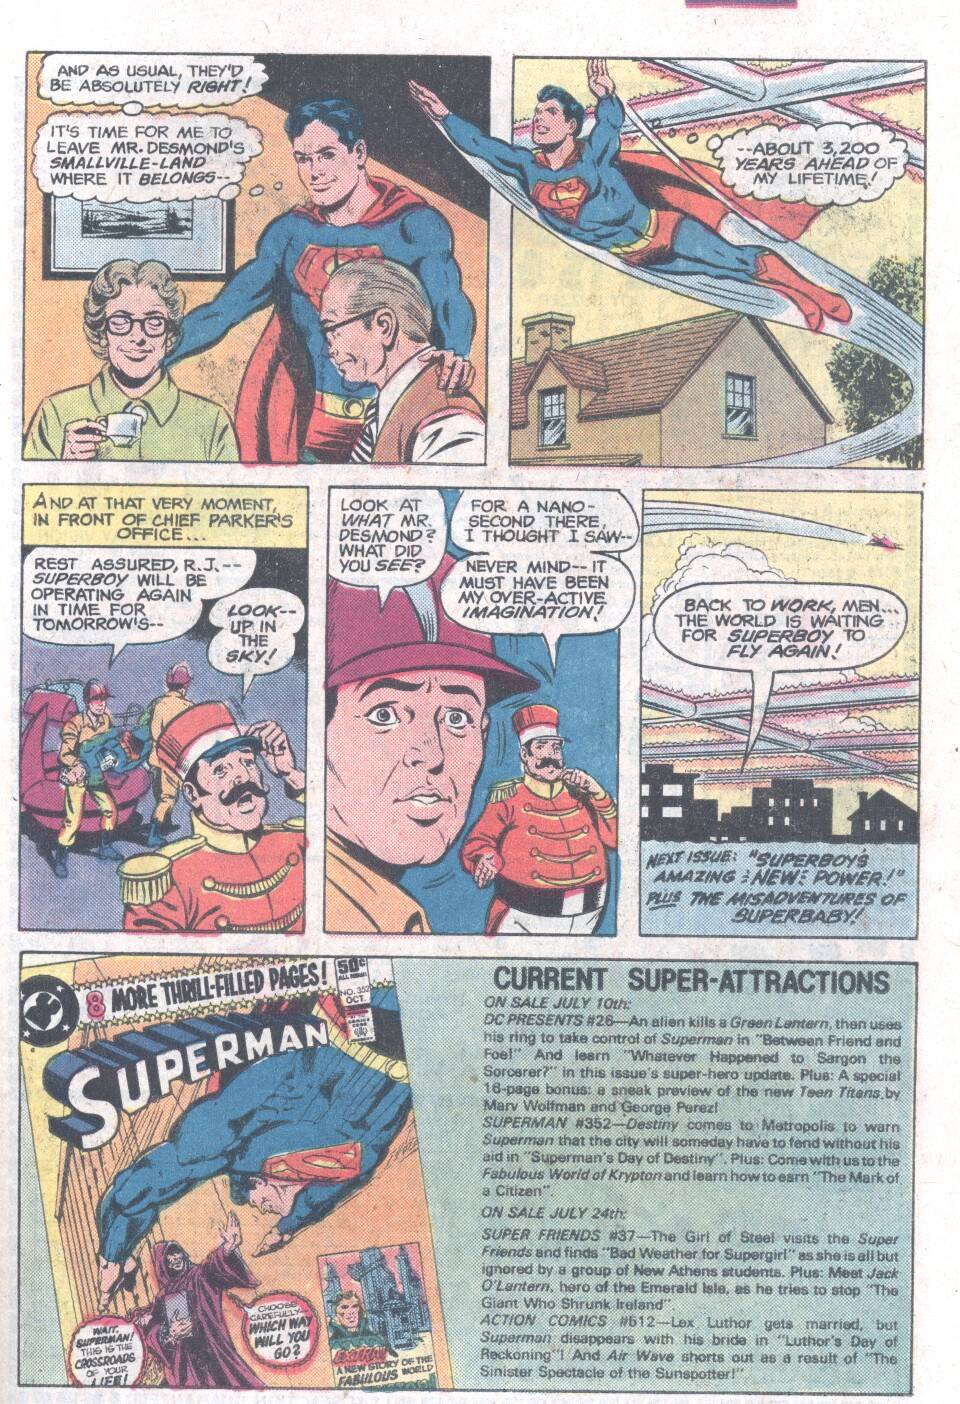 The New Adventures of Superboy 10 Page 17